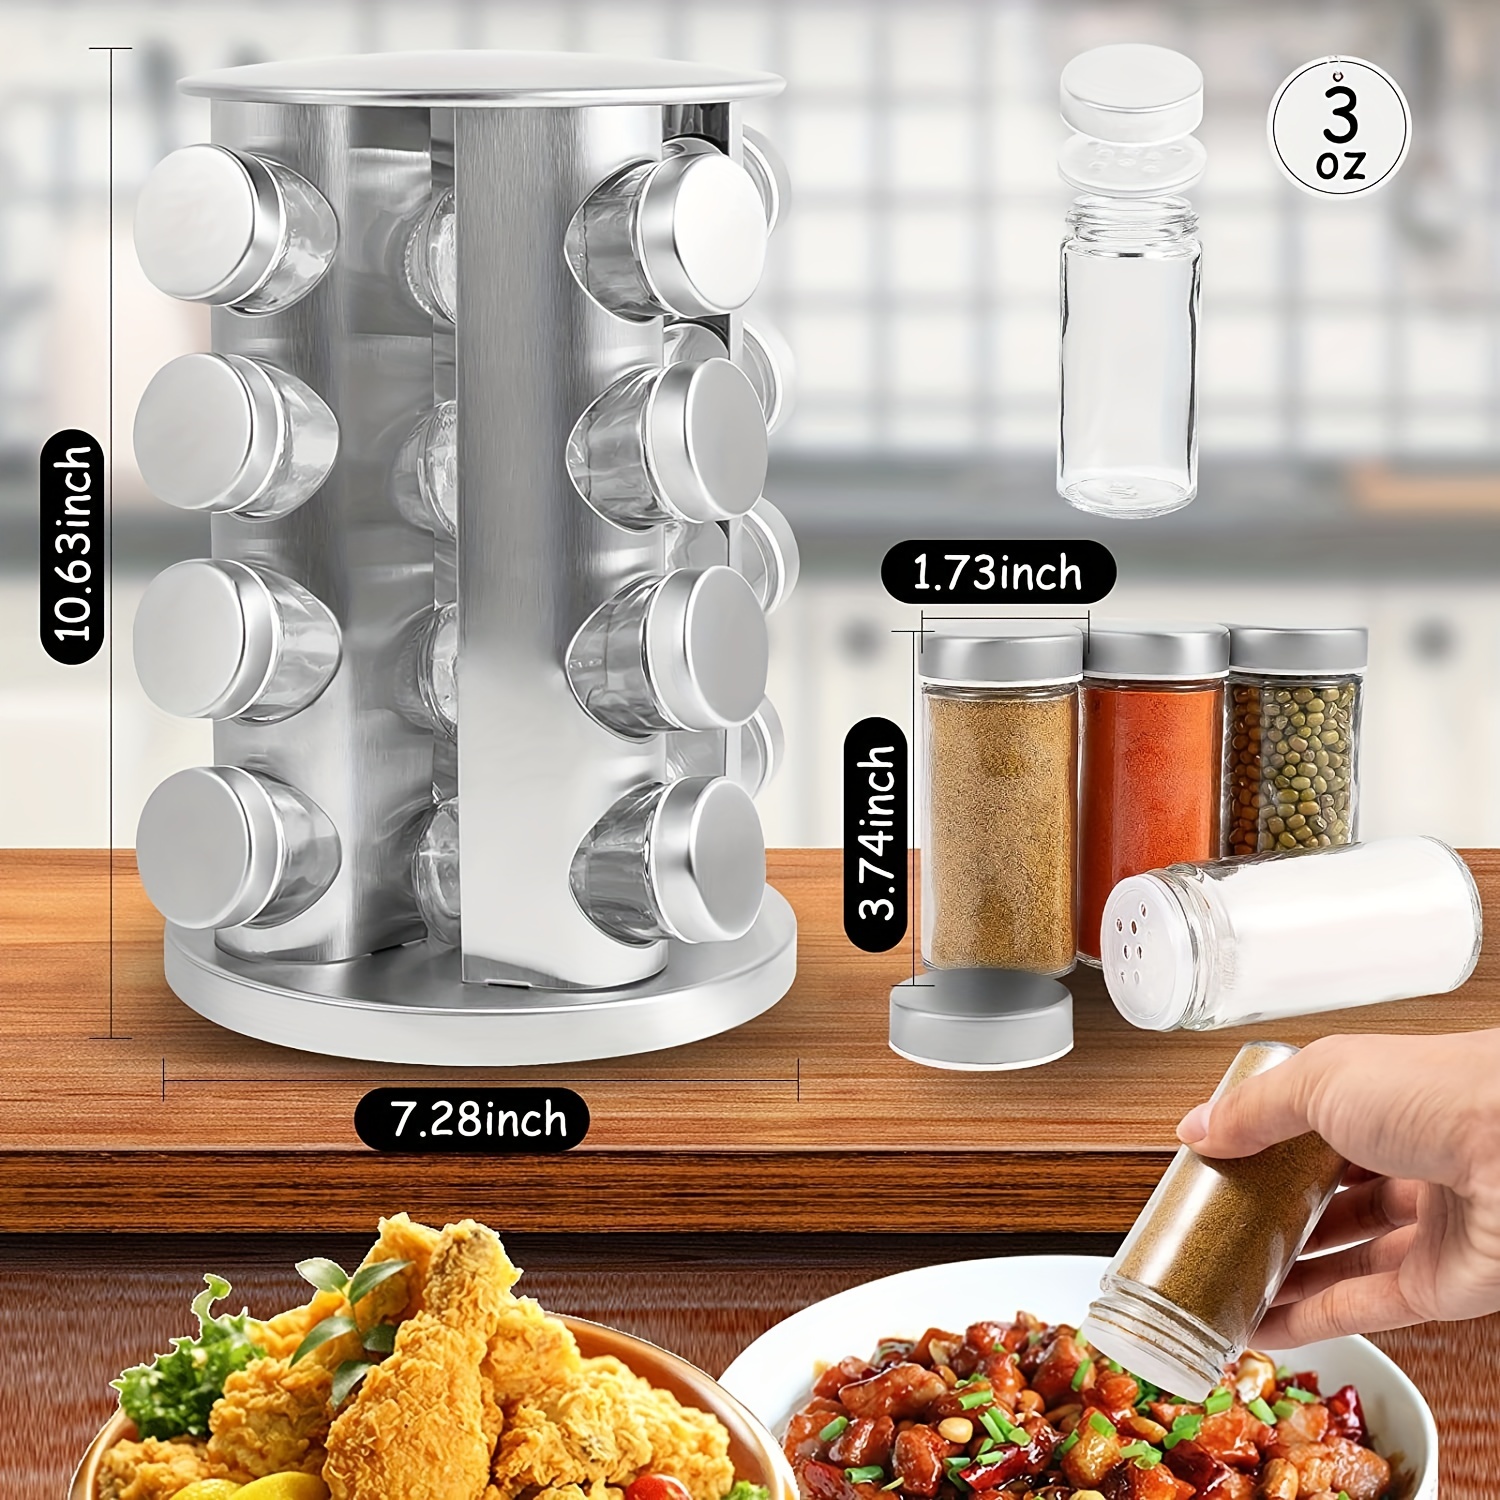 Seasoning & Spice Tools - Kitchen & Cooking